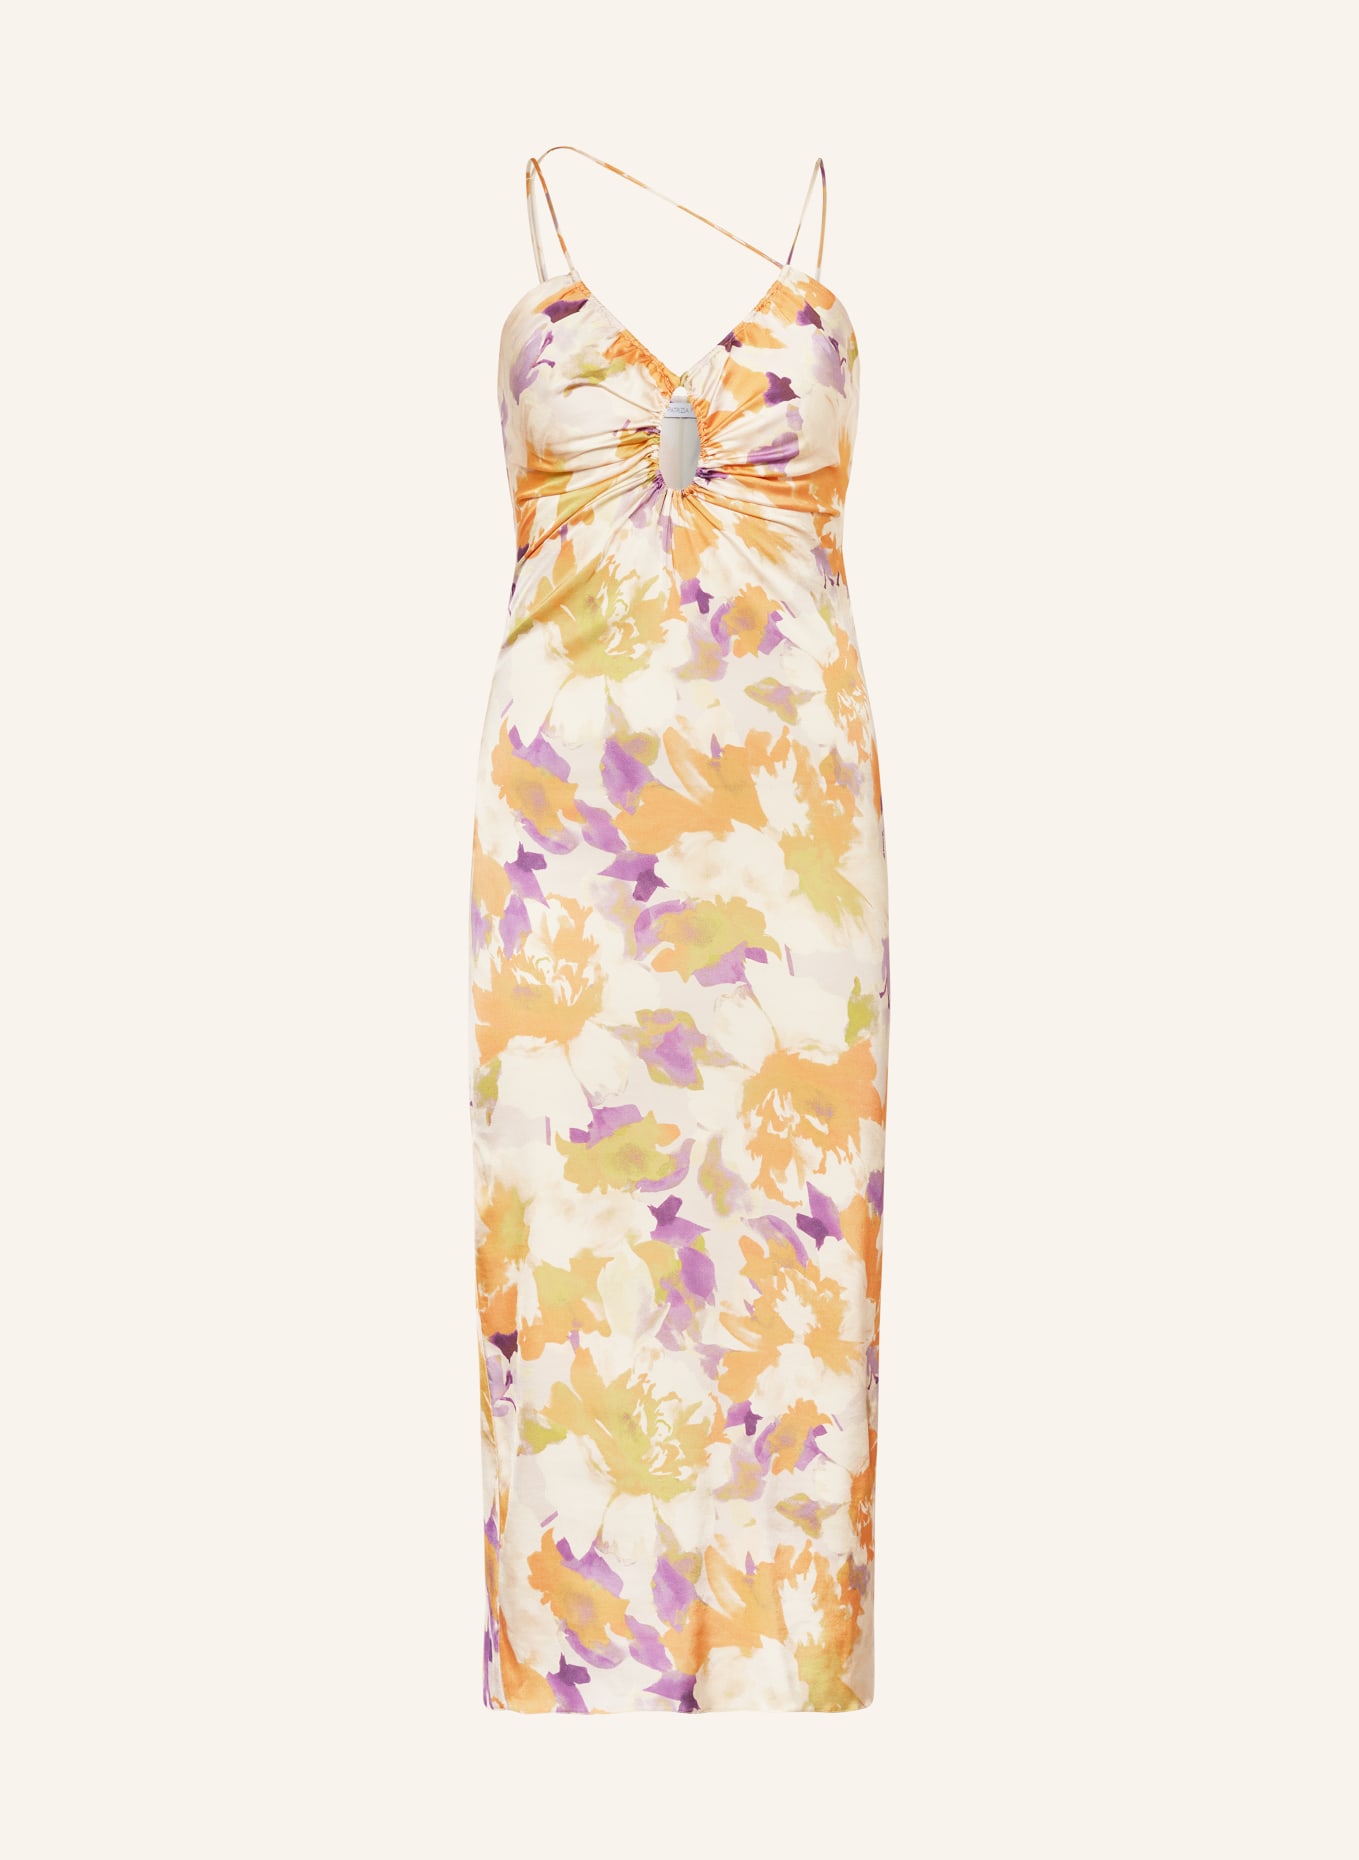 PATRIZIA PEPE Dress with cut-out, Color: LIGHT BROWN/ LIGHT ORANGE/ DARK YELLOW (Image 1)